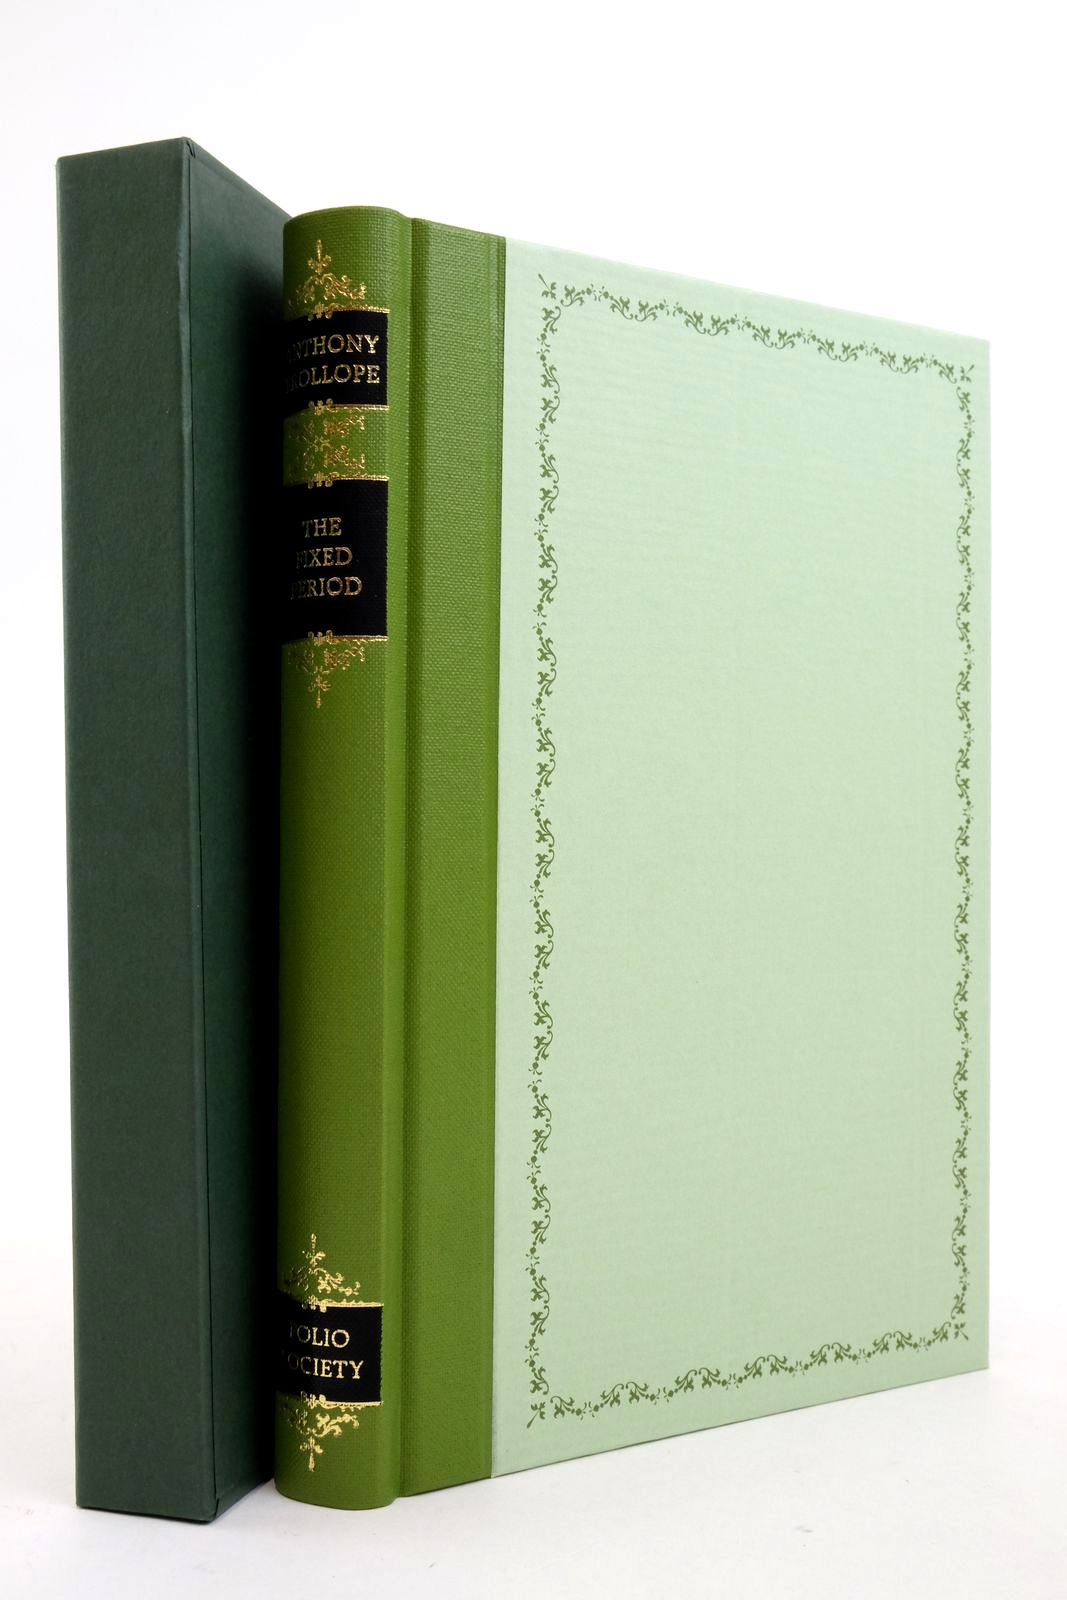 Photo of THE FIXED PERIOD written by Trollope, Anthony illustrated by Trimby, Elisa published by Folio Society (STOCK CODE: 2138265)  for sale by Stella & Rose's Books